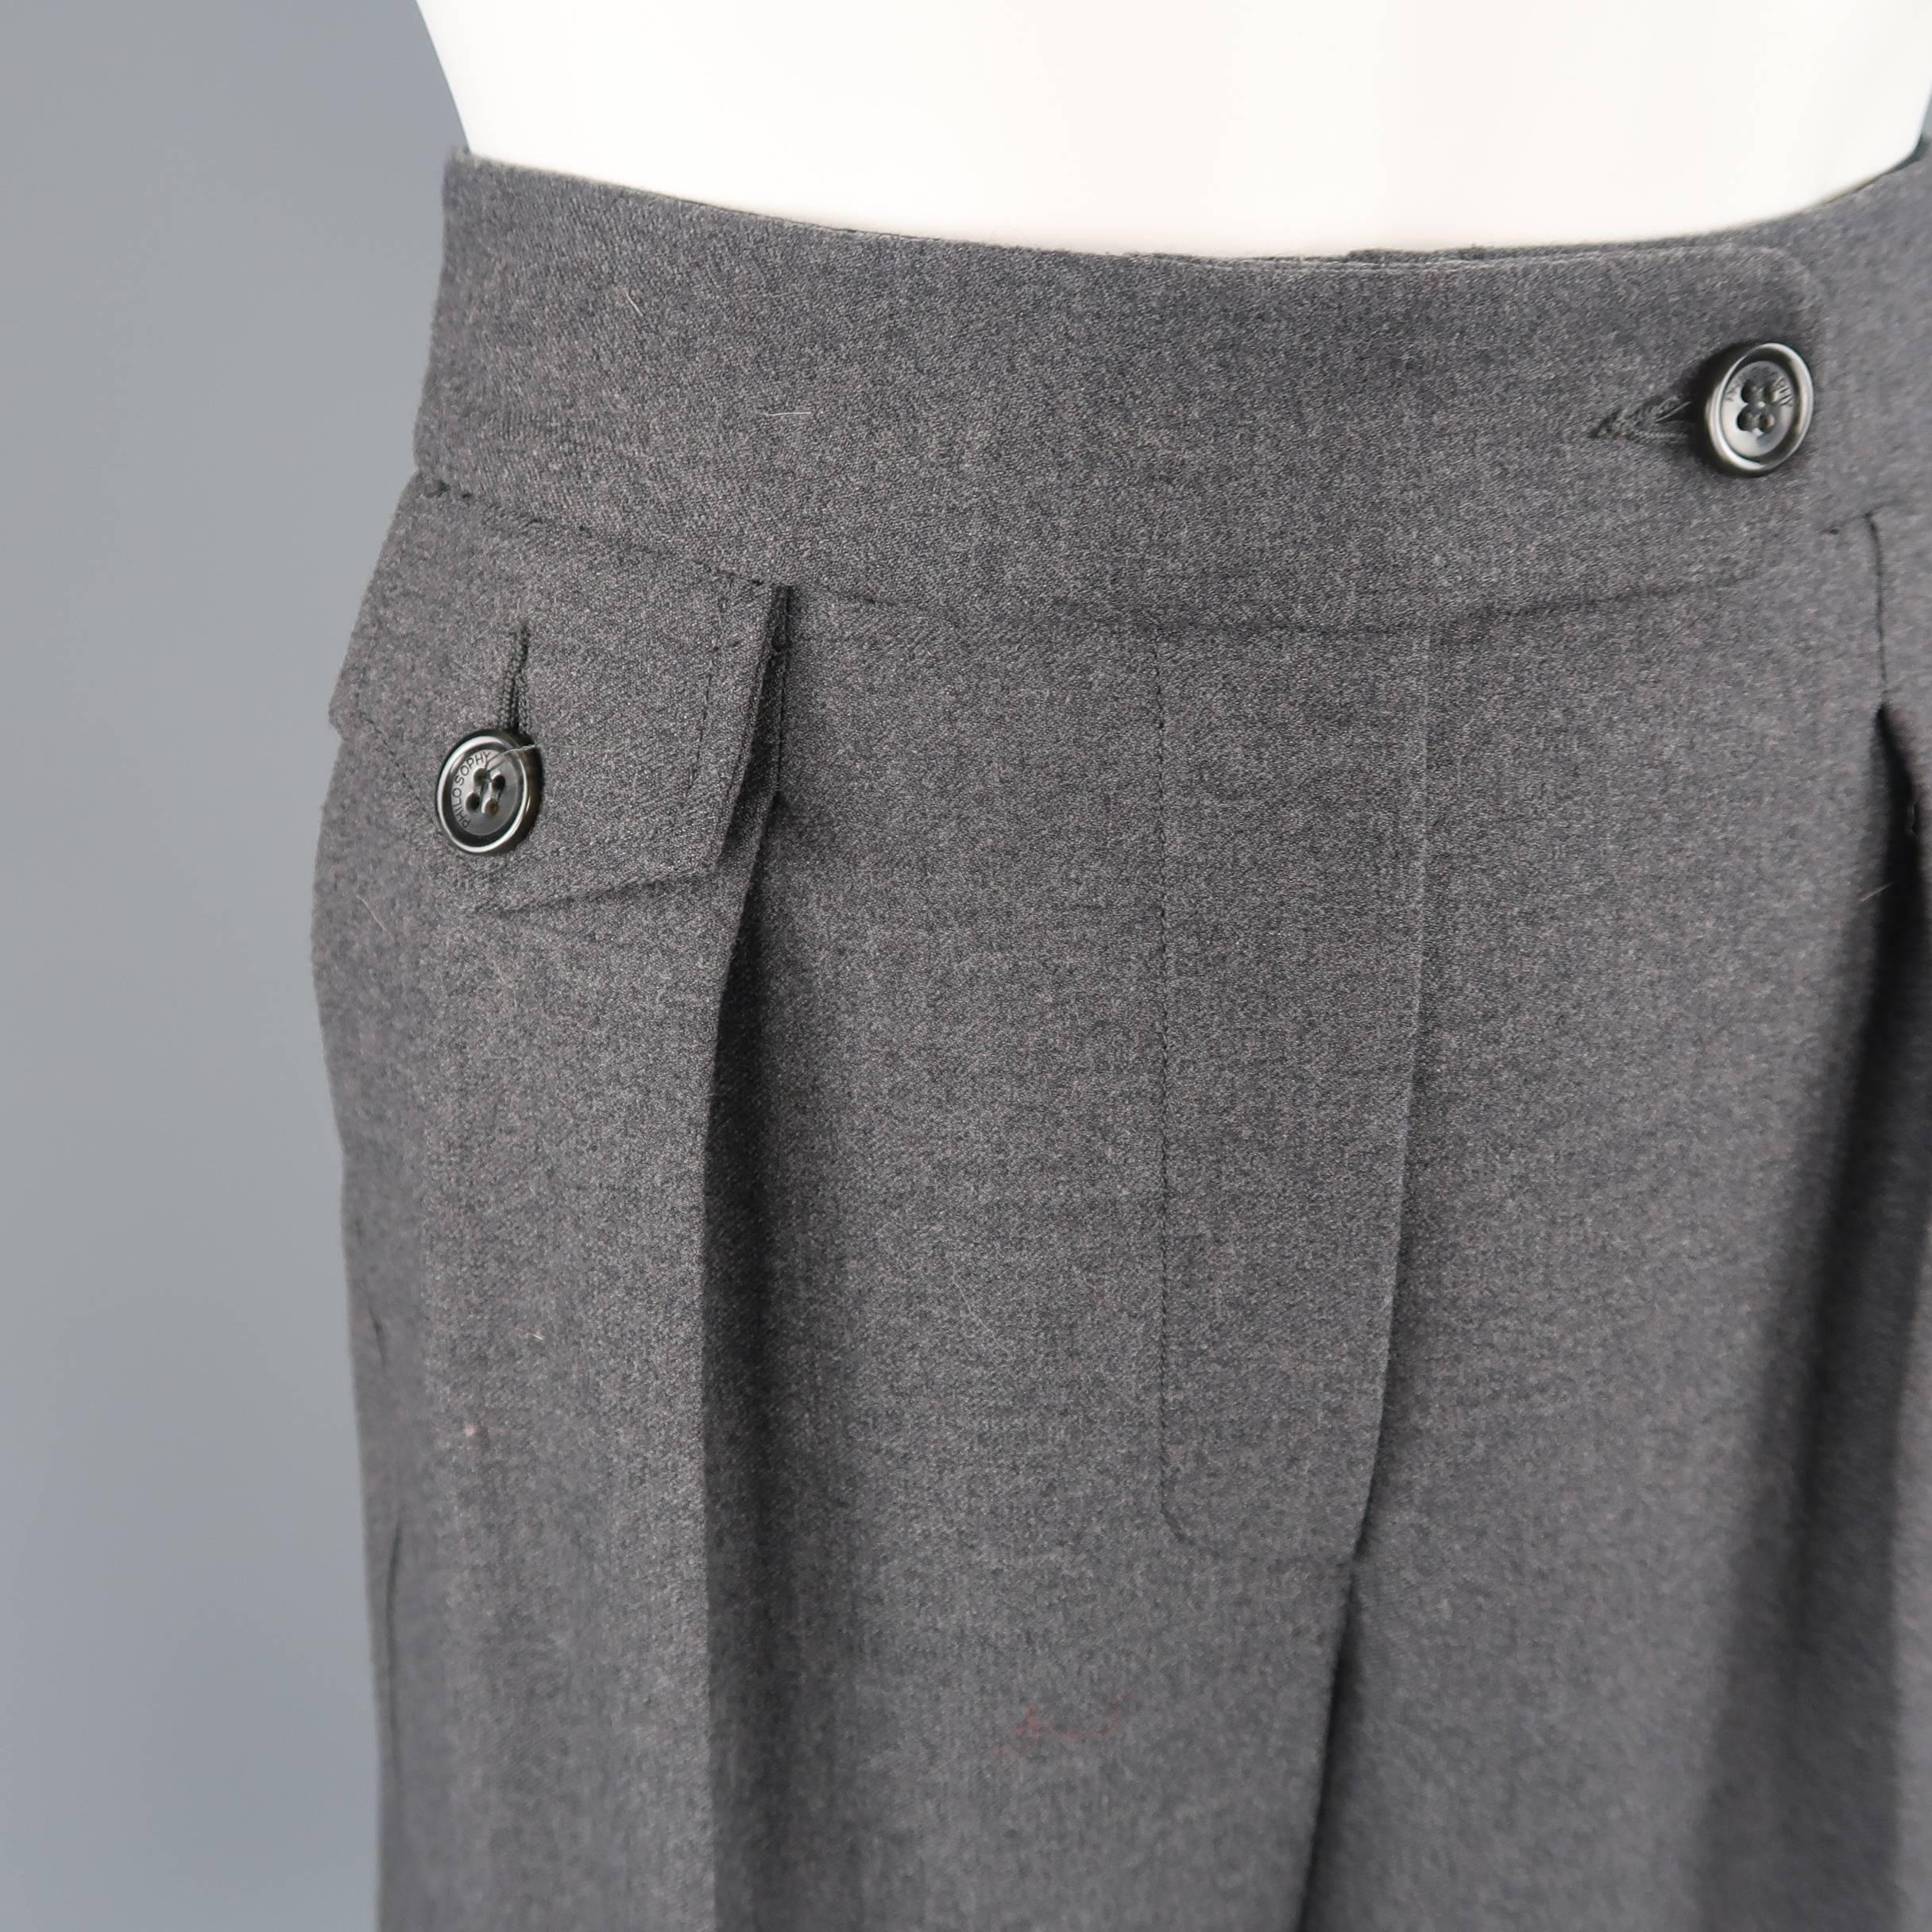 Philosophy di Alberta Ferretti Bermuda shorts come in dark gray wool with a pleated front, flap pocket, and cuffed hem. Made in Italy.
 
Excellent Pre-Owned Condition.
Marked: 4
 
Measurements:
 
Waist: 30 in.
Rise: 11 in.
Inseam: 8 in.
